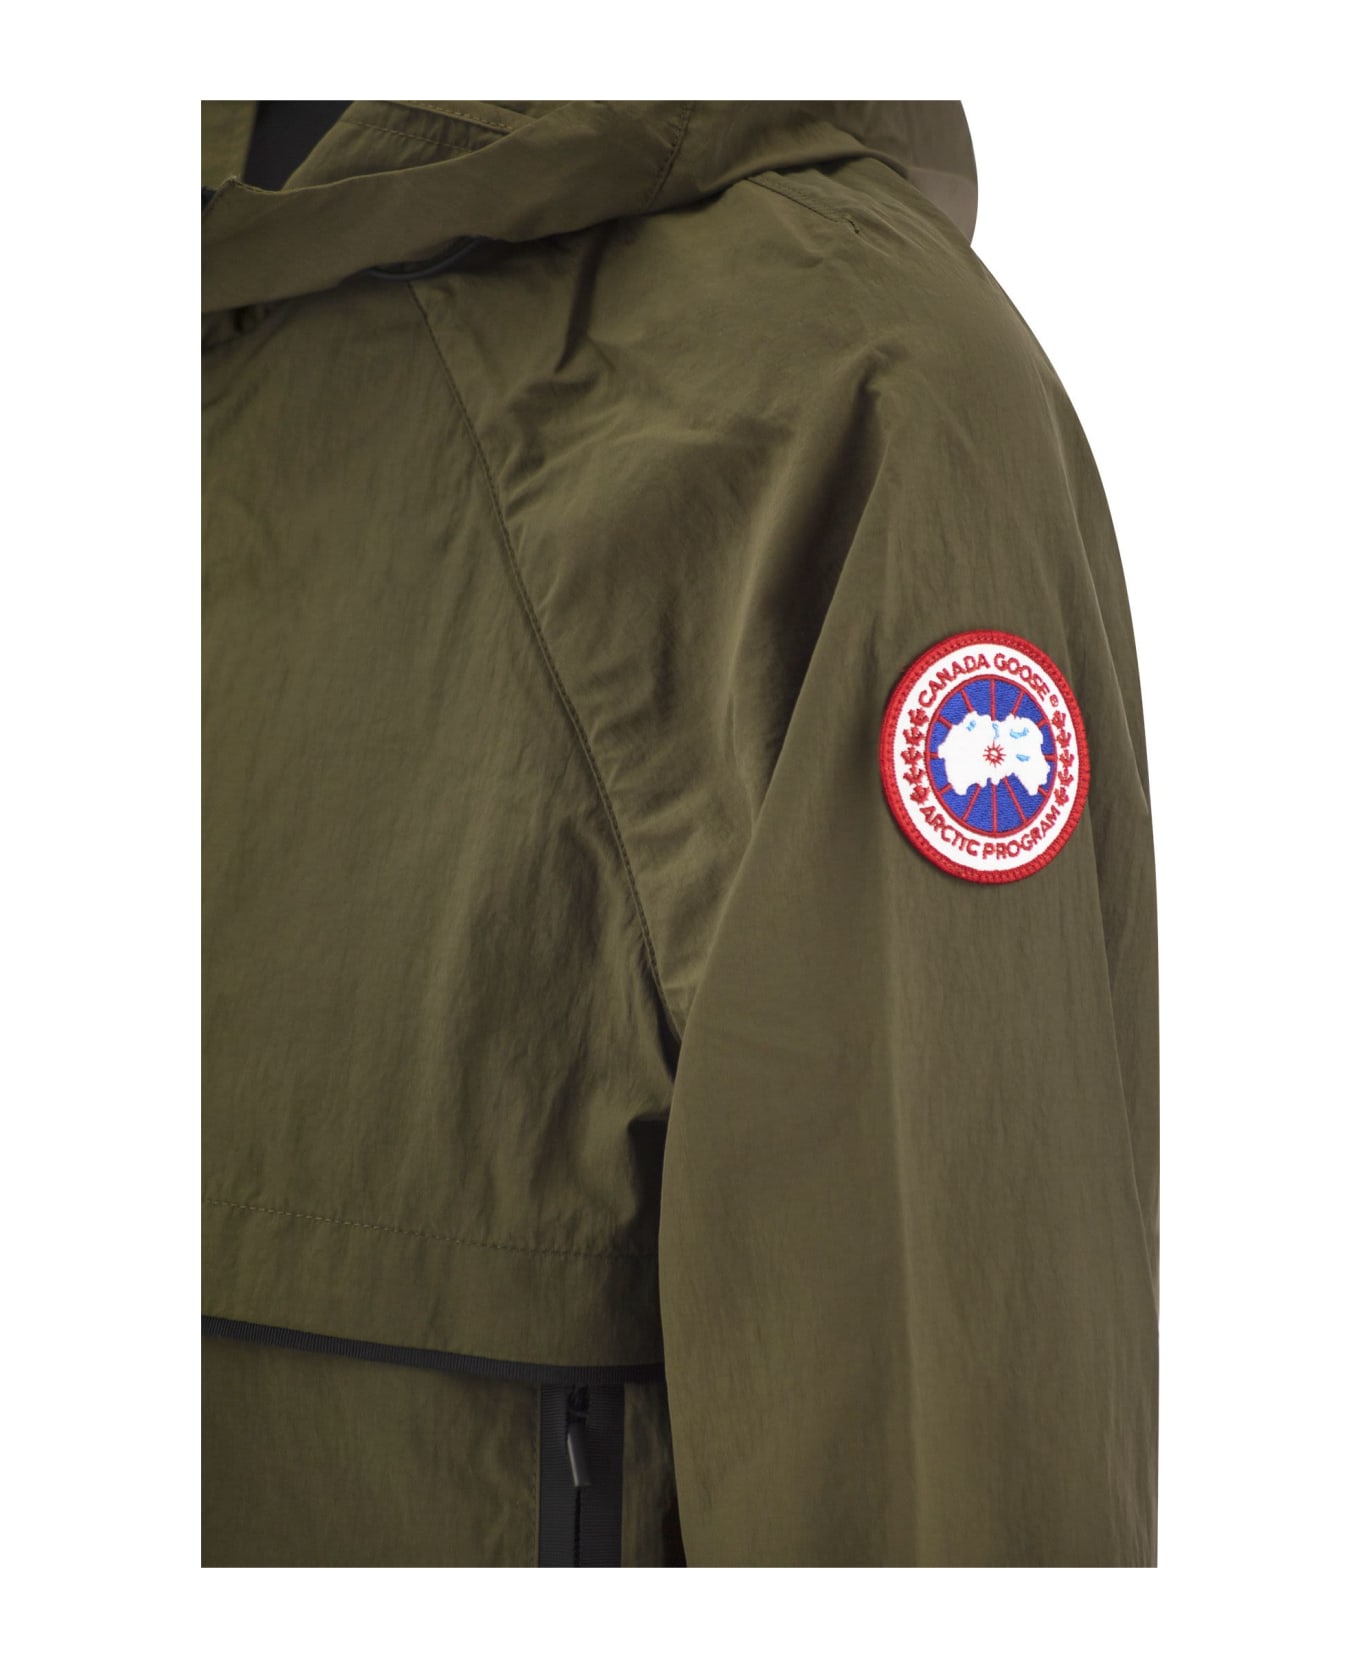 Canada Goose Faber - Hooded Jacket - Military Green ジャケット